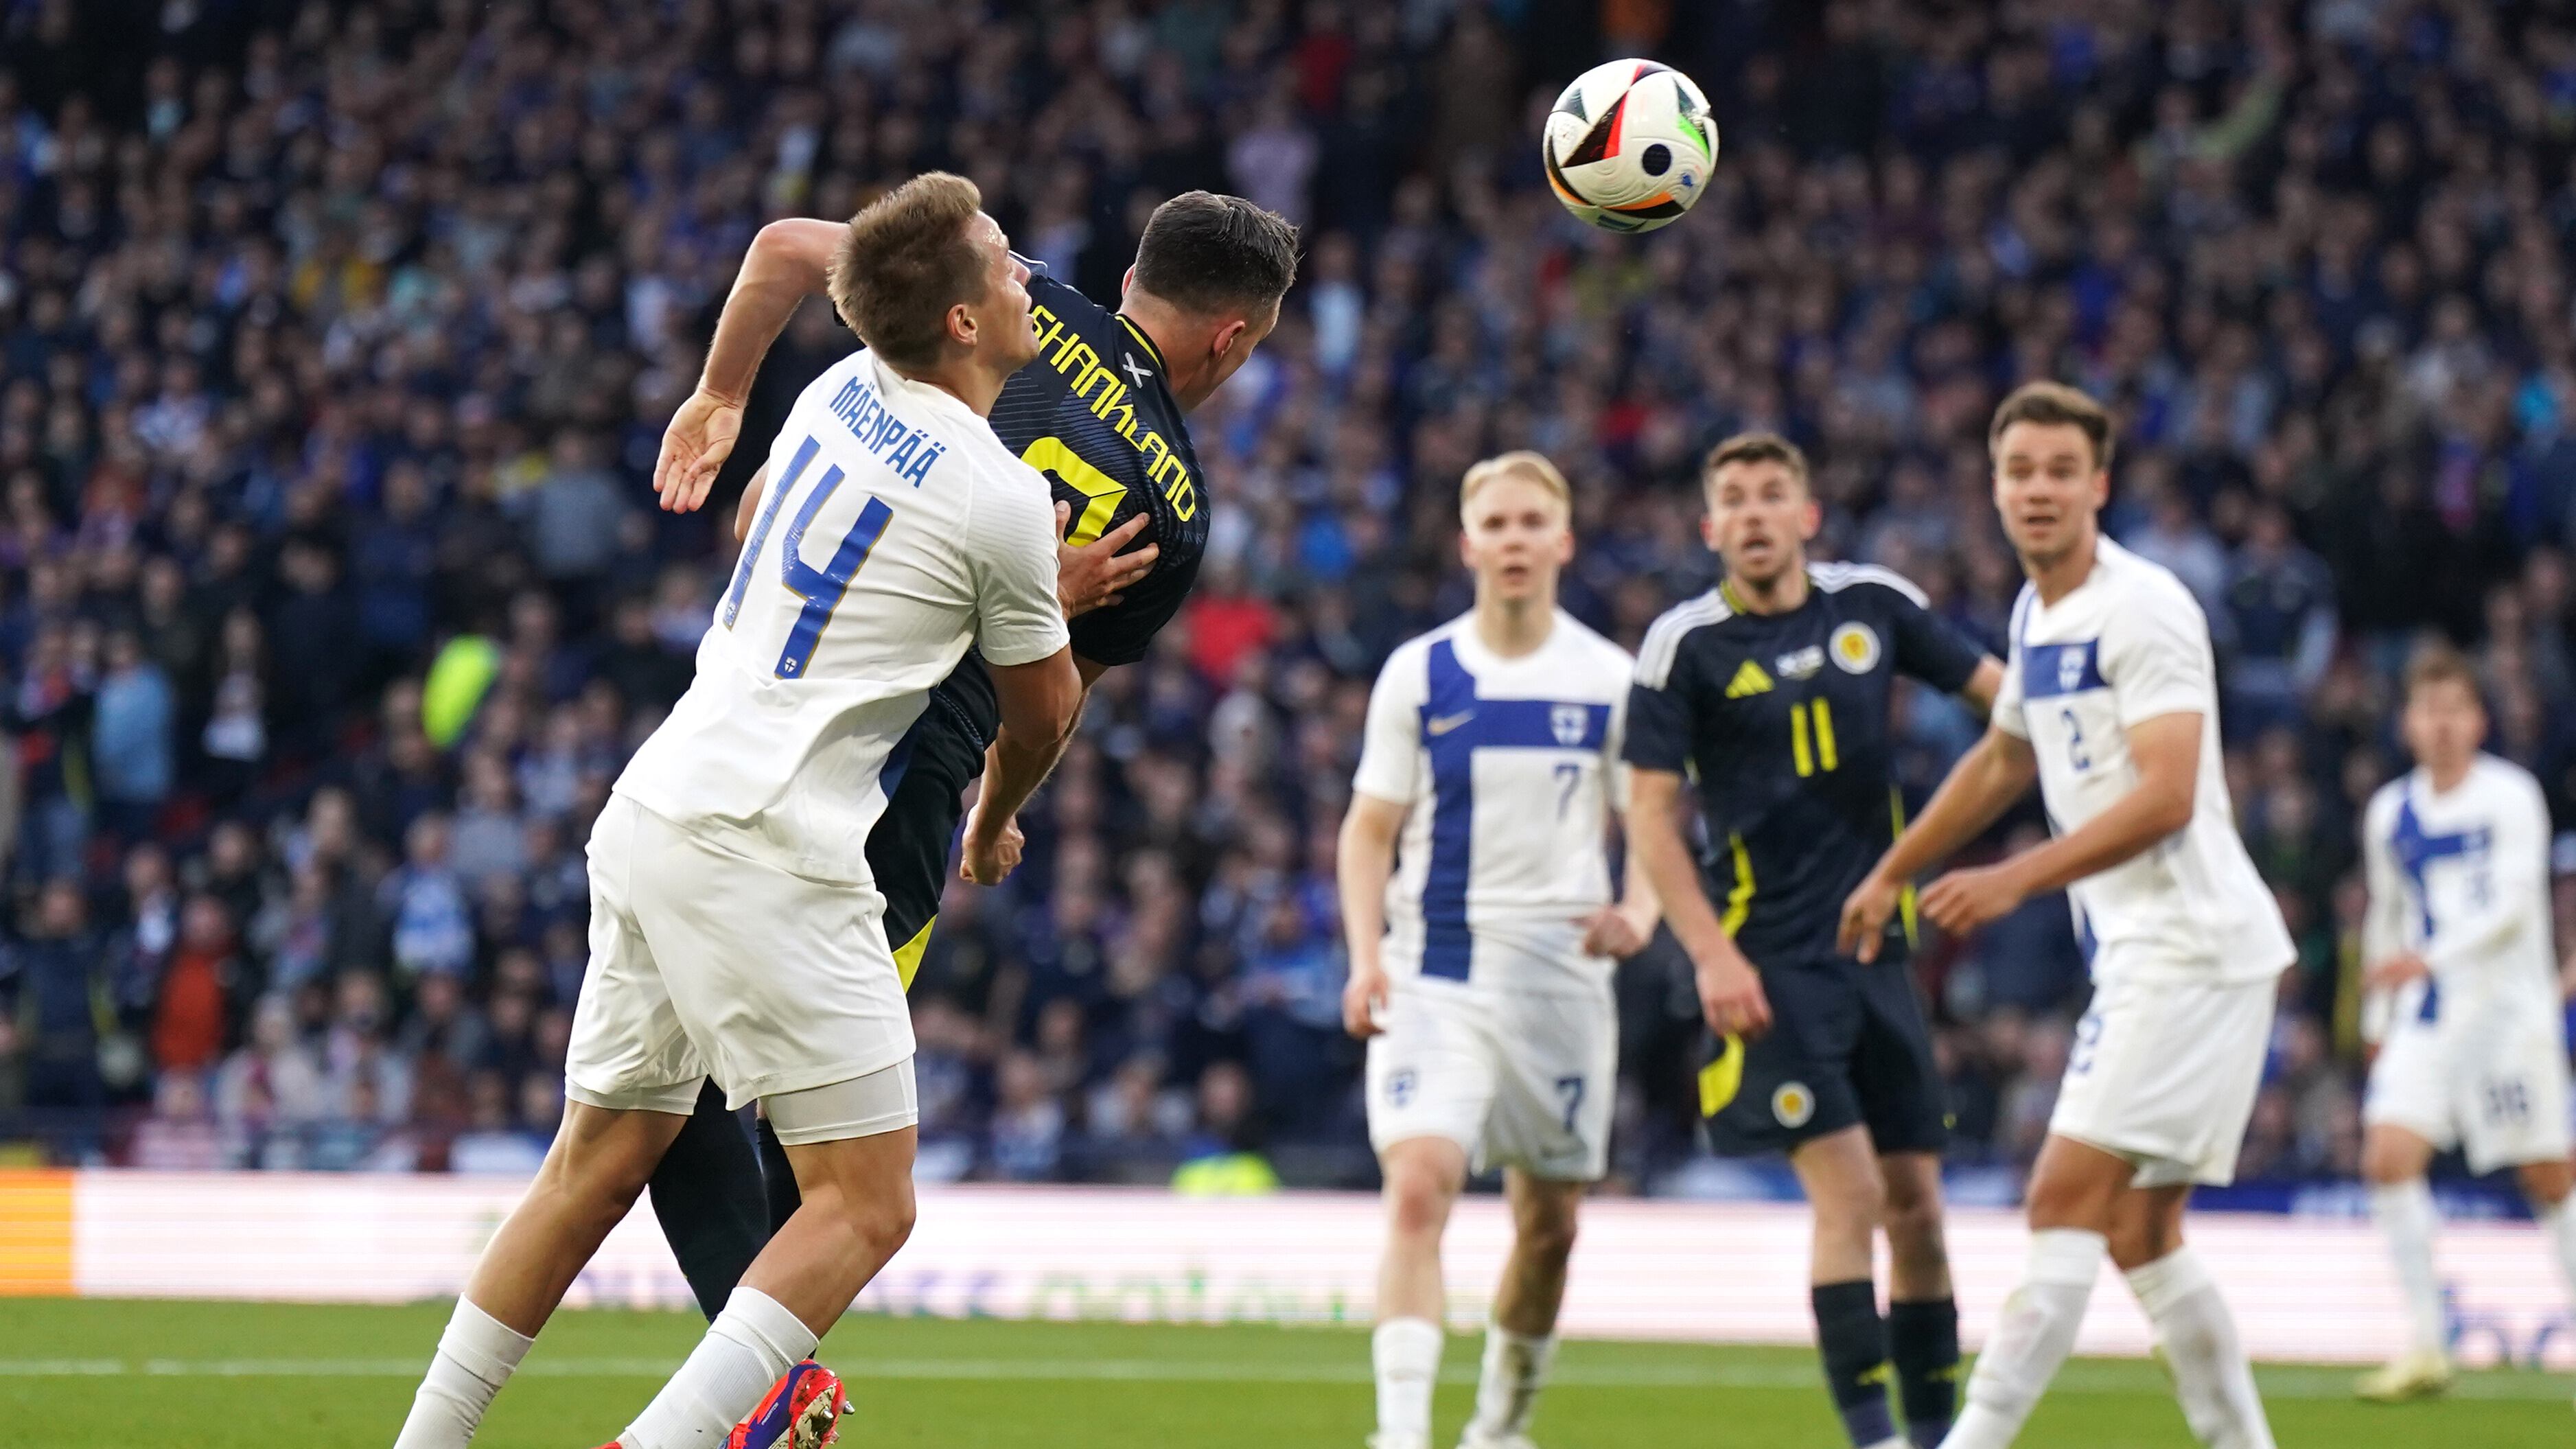 Scotland’s Lawrence Shankland, second left, scores their second goal against Finland